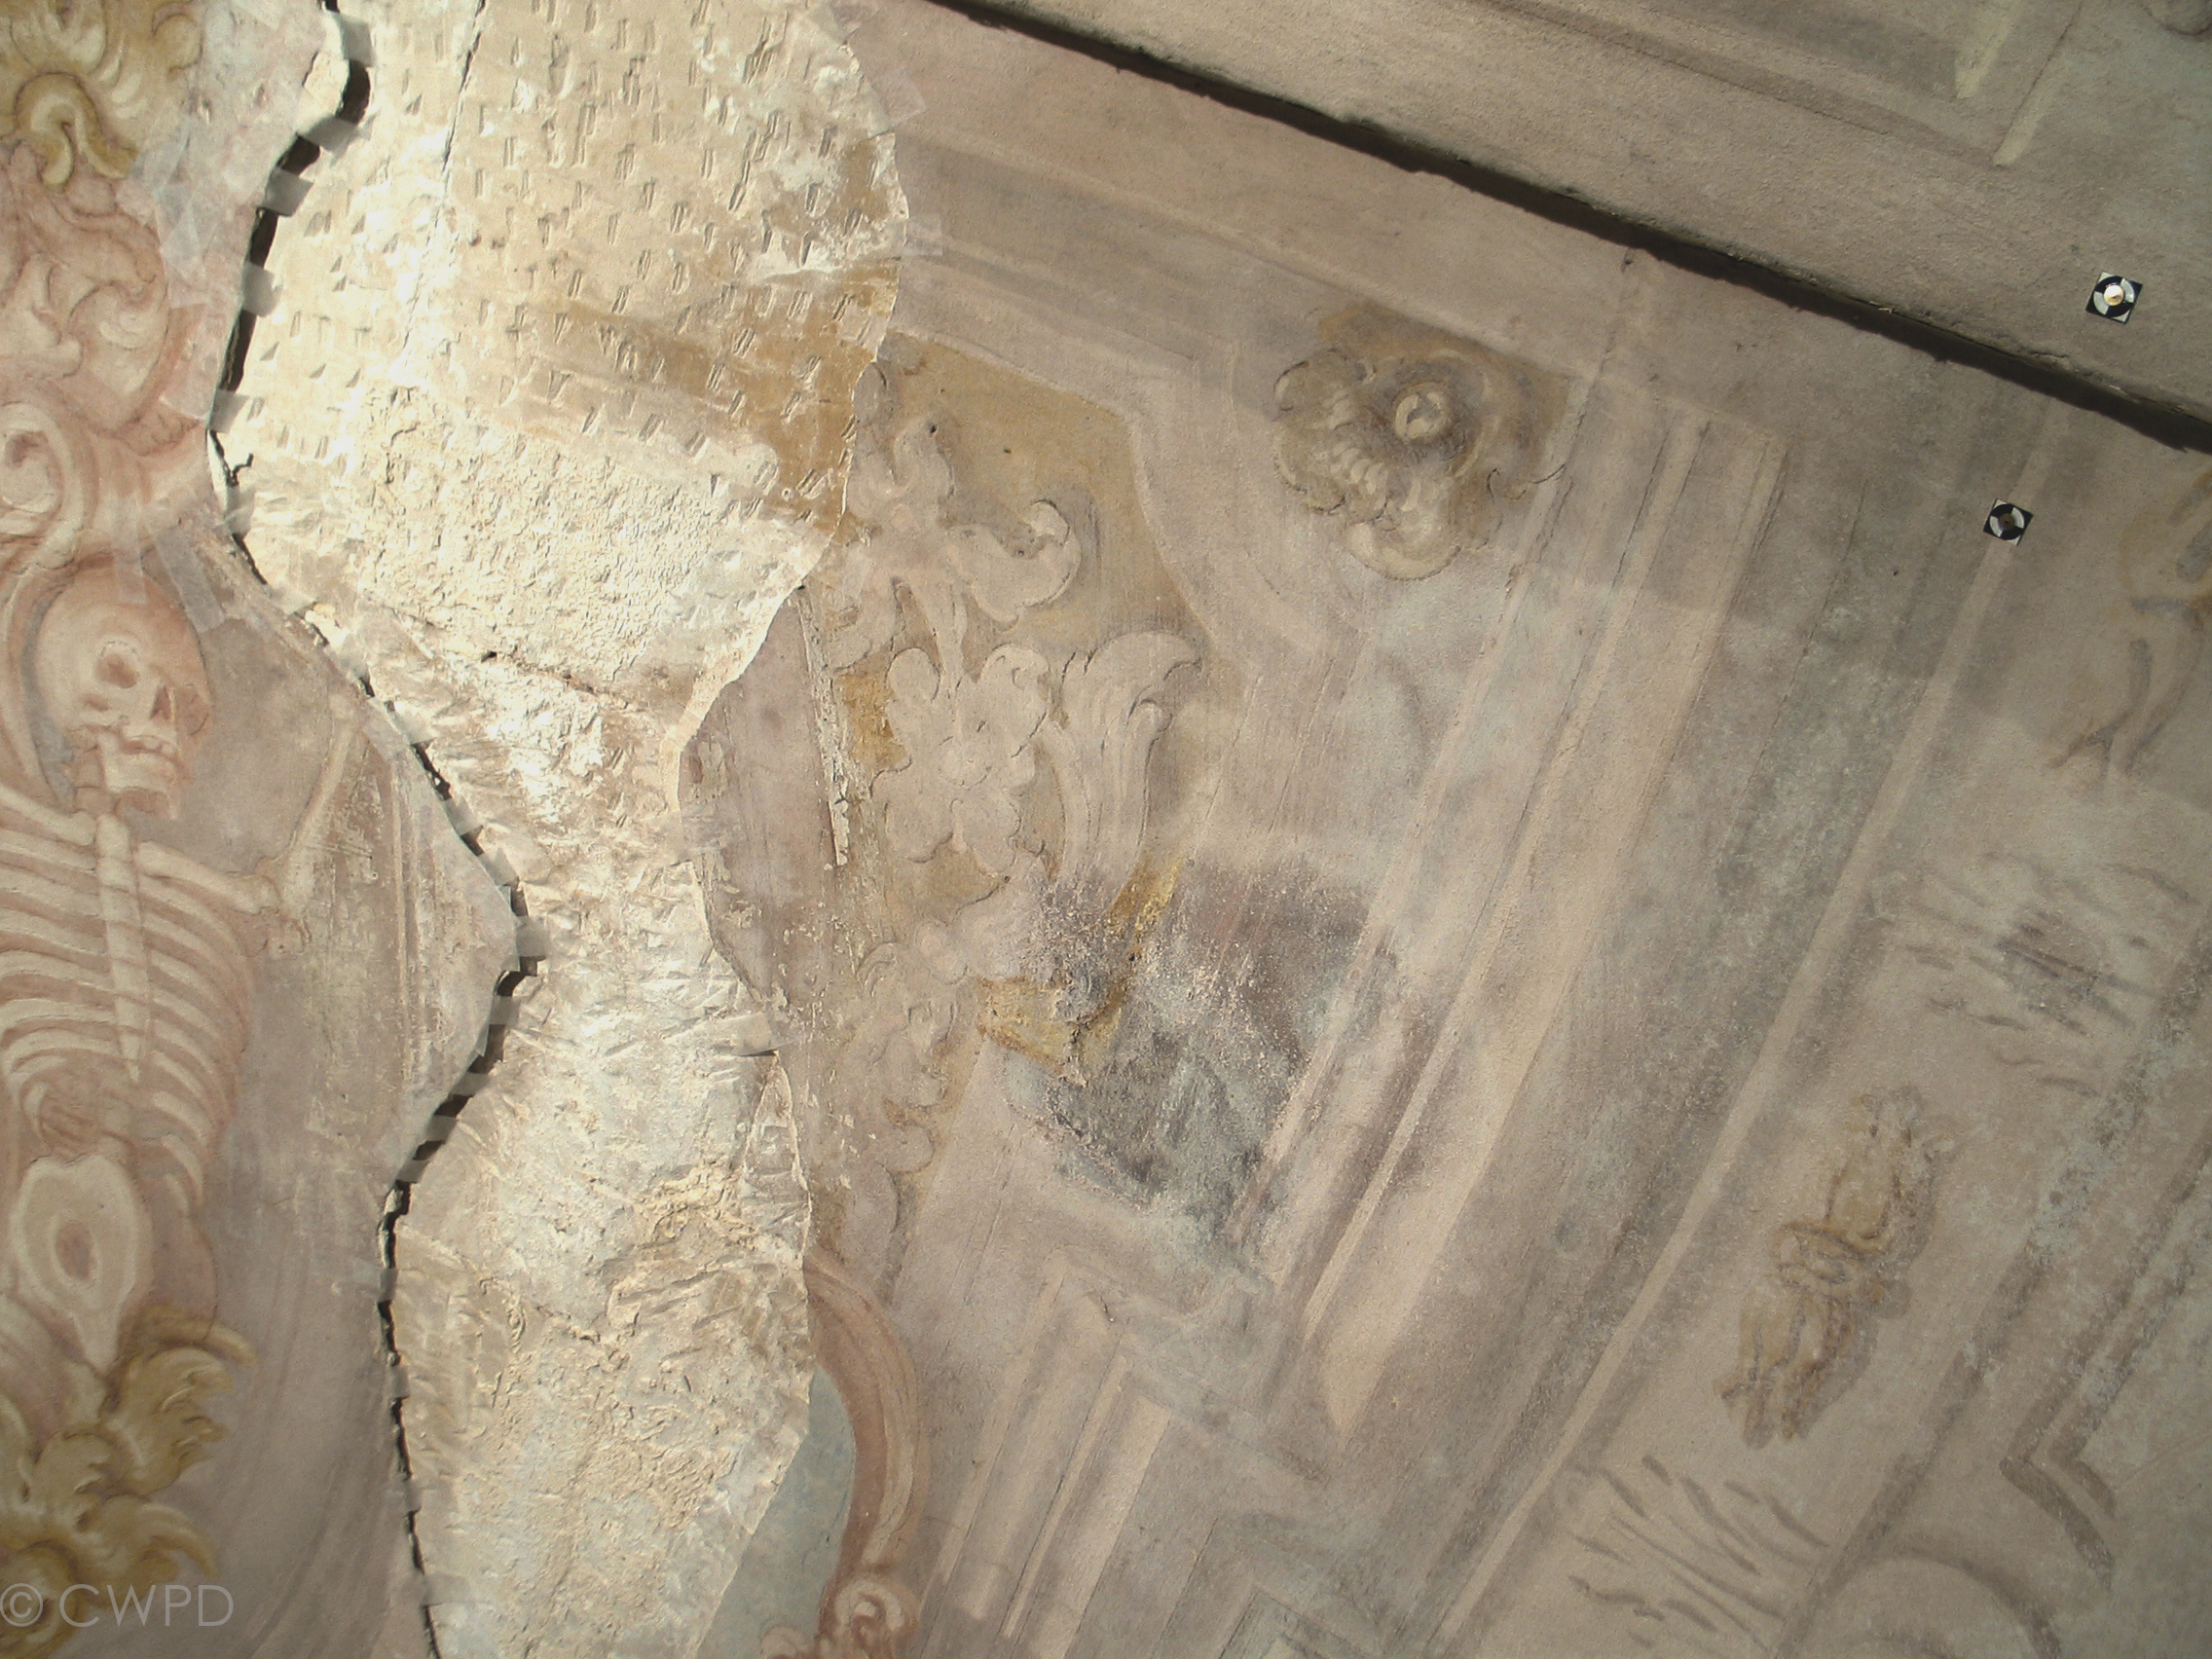  large areas of the wall paintings were detaching and at imminent risk of collapse.  Image © Courtauld CWPD 